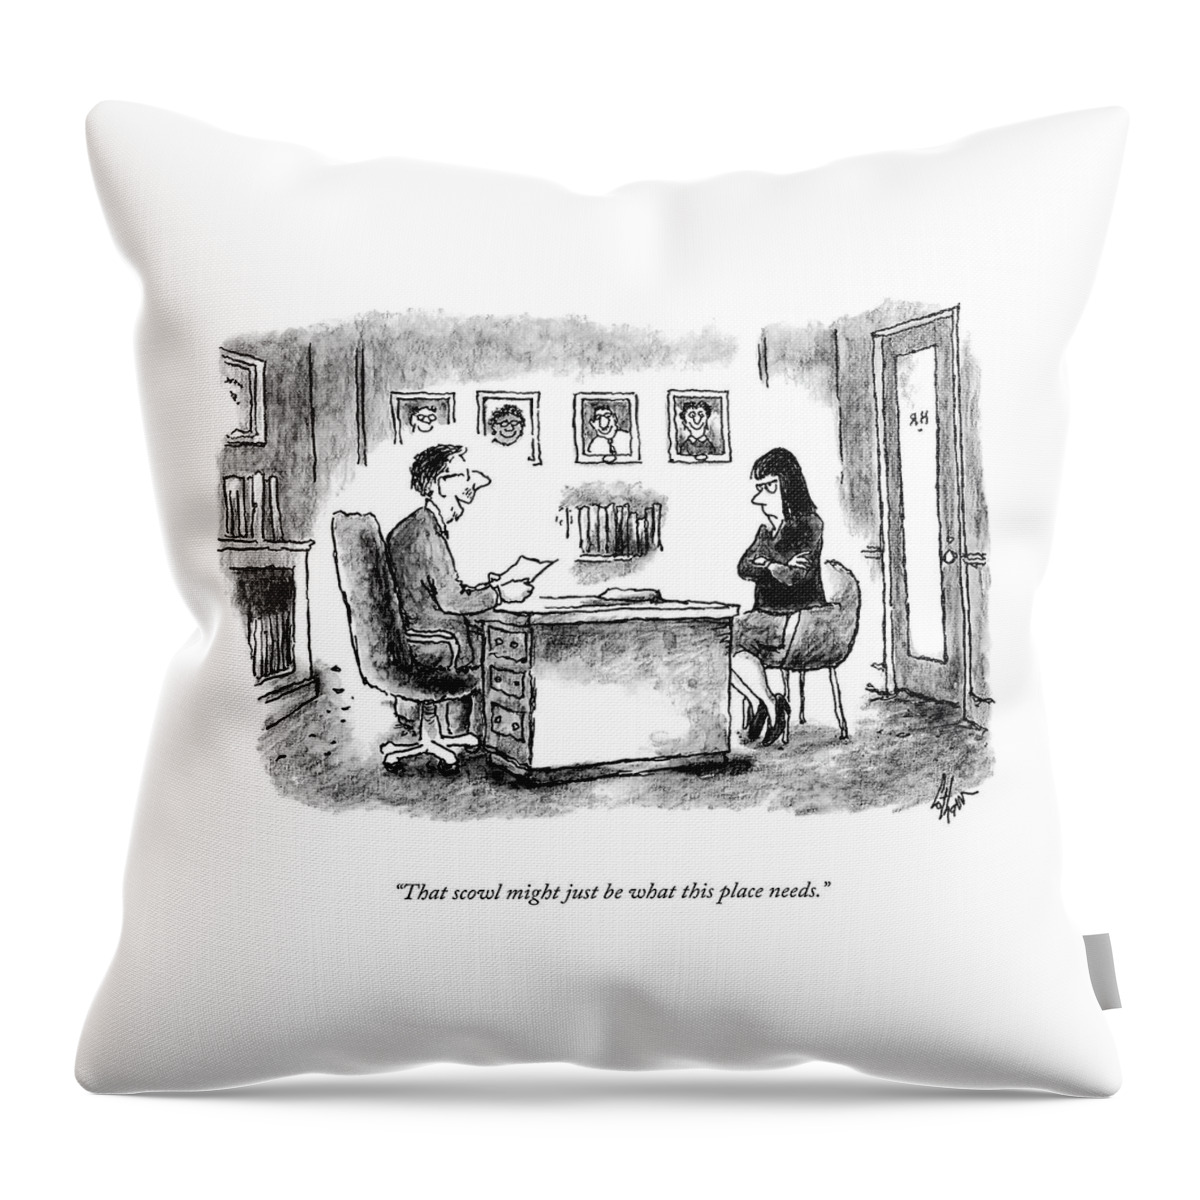 Just What This Place Needs Throw Pillow